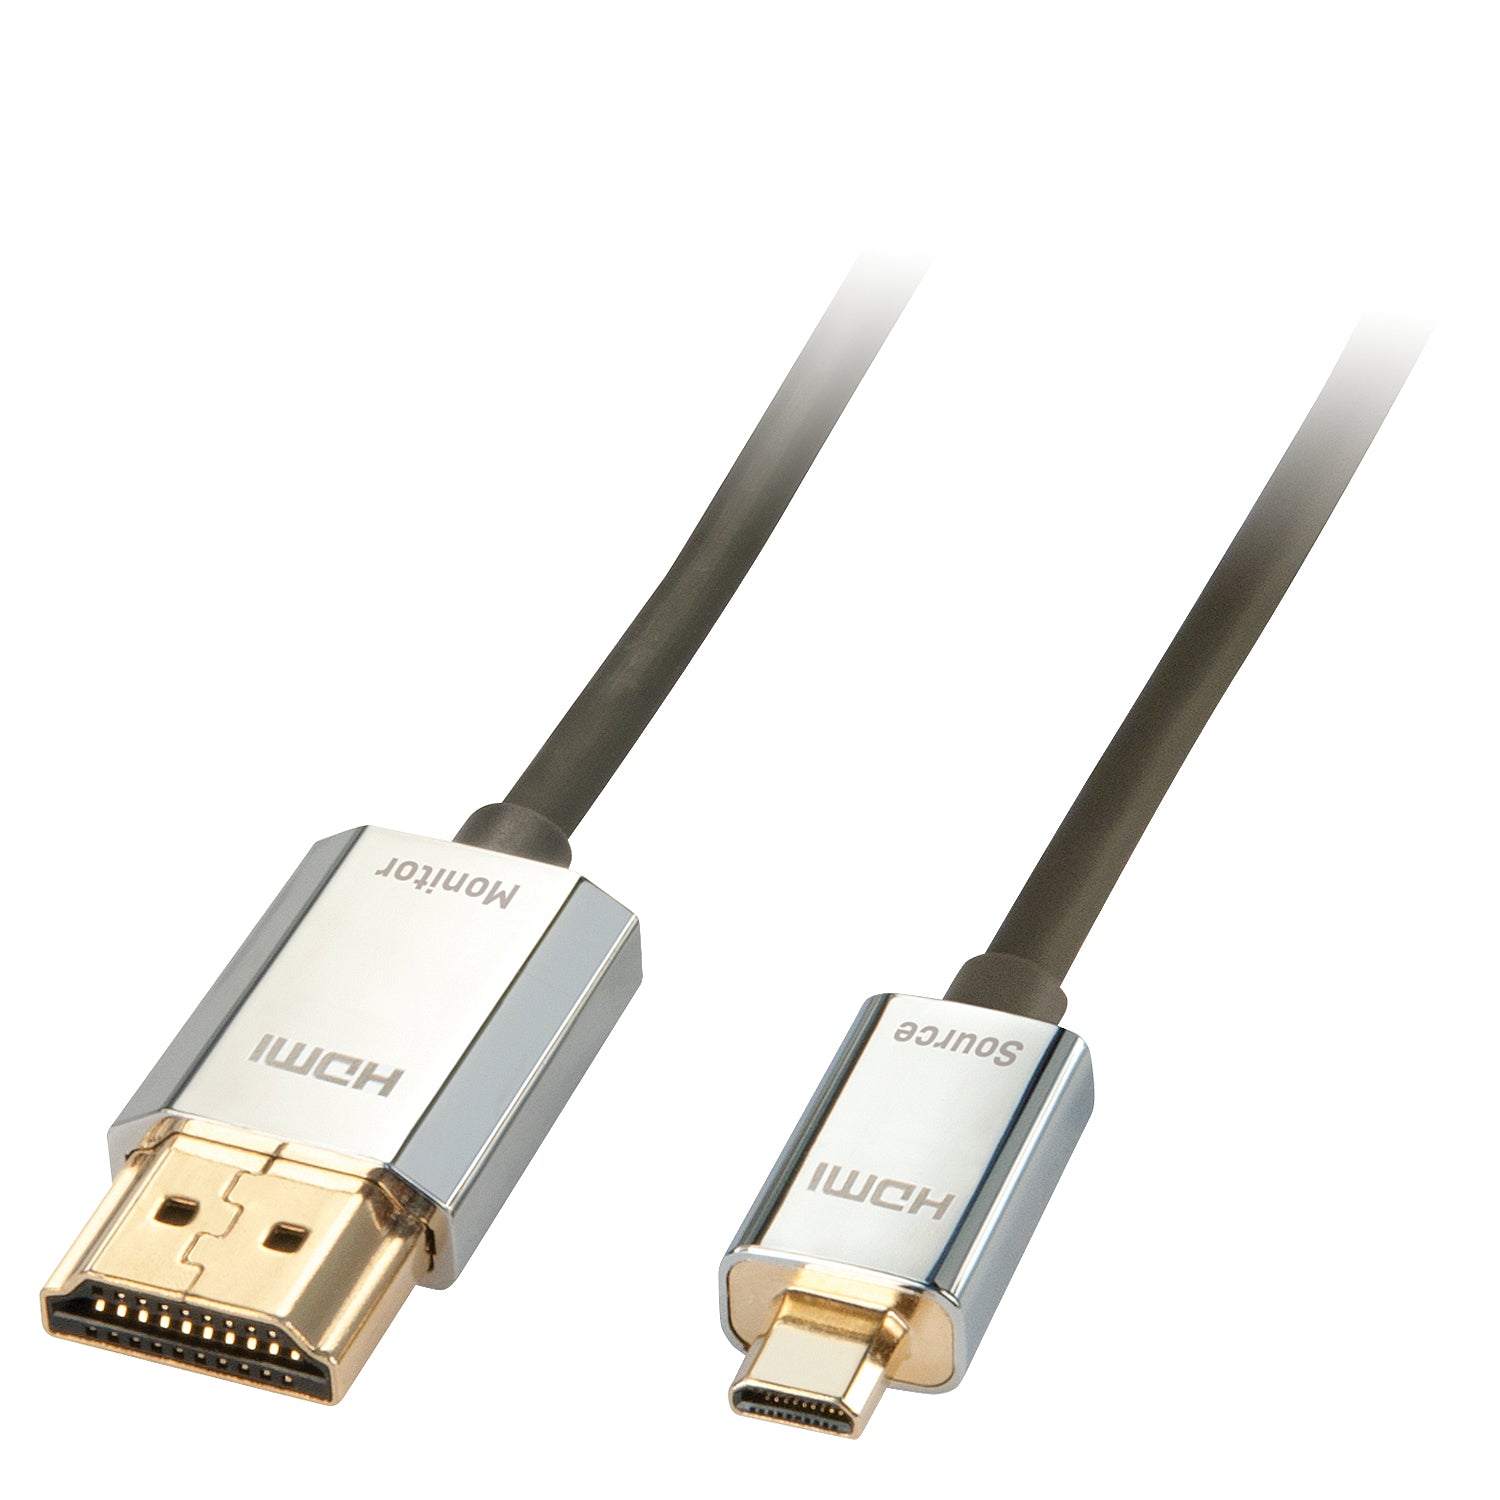 CROMO Slim HDMI High Speed A/D Cable